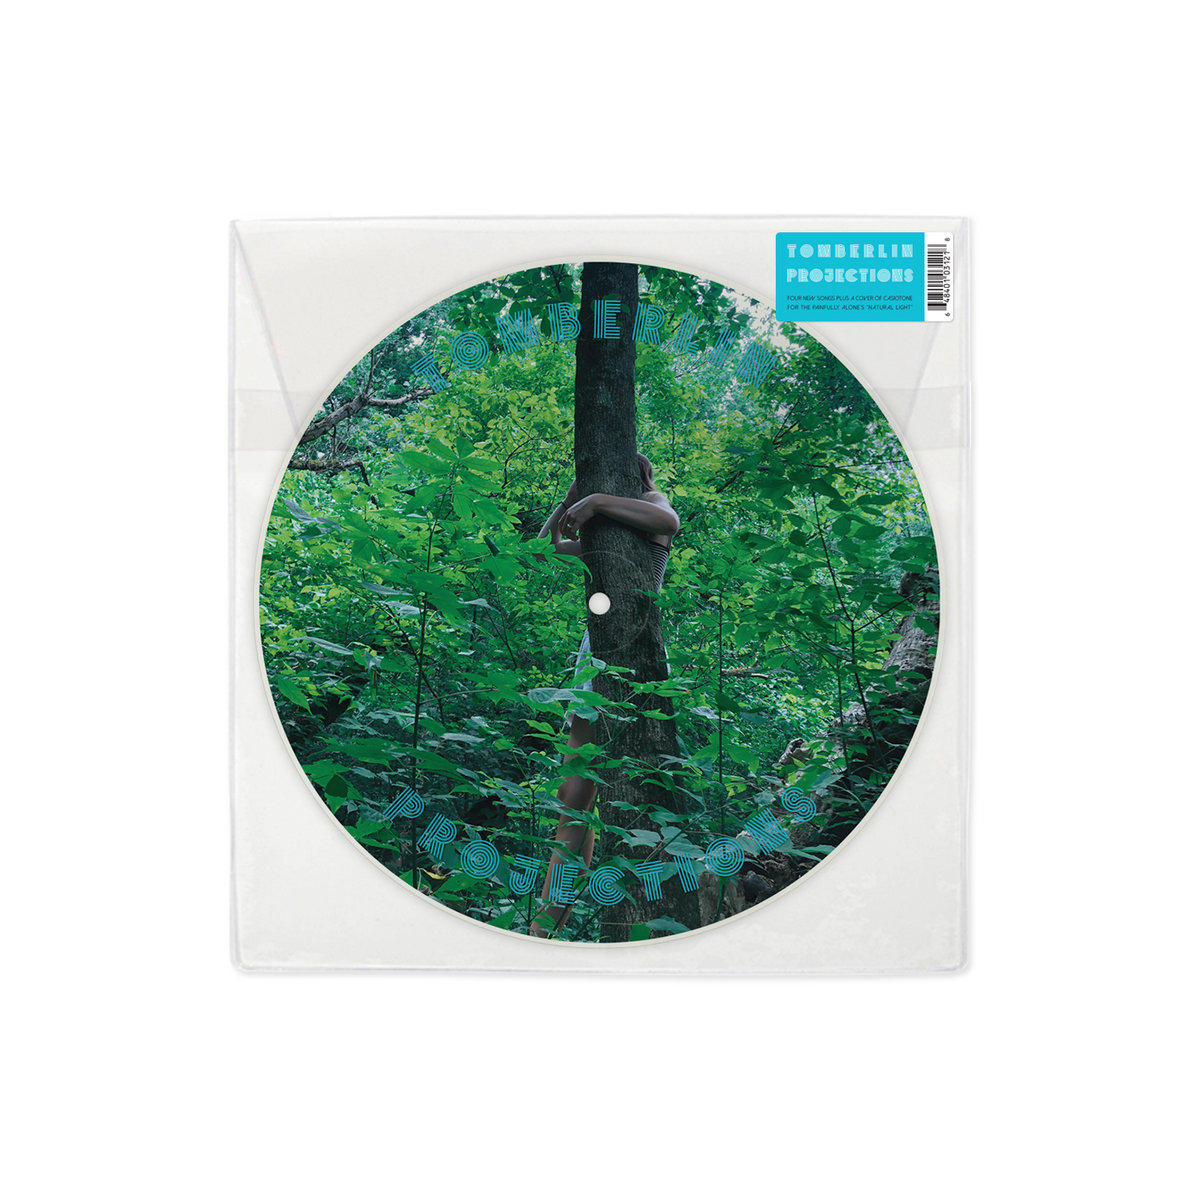 Tomberlin "Projections" EP Picture disc